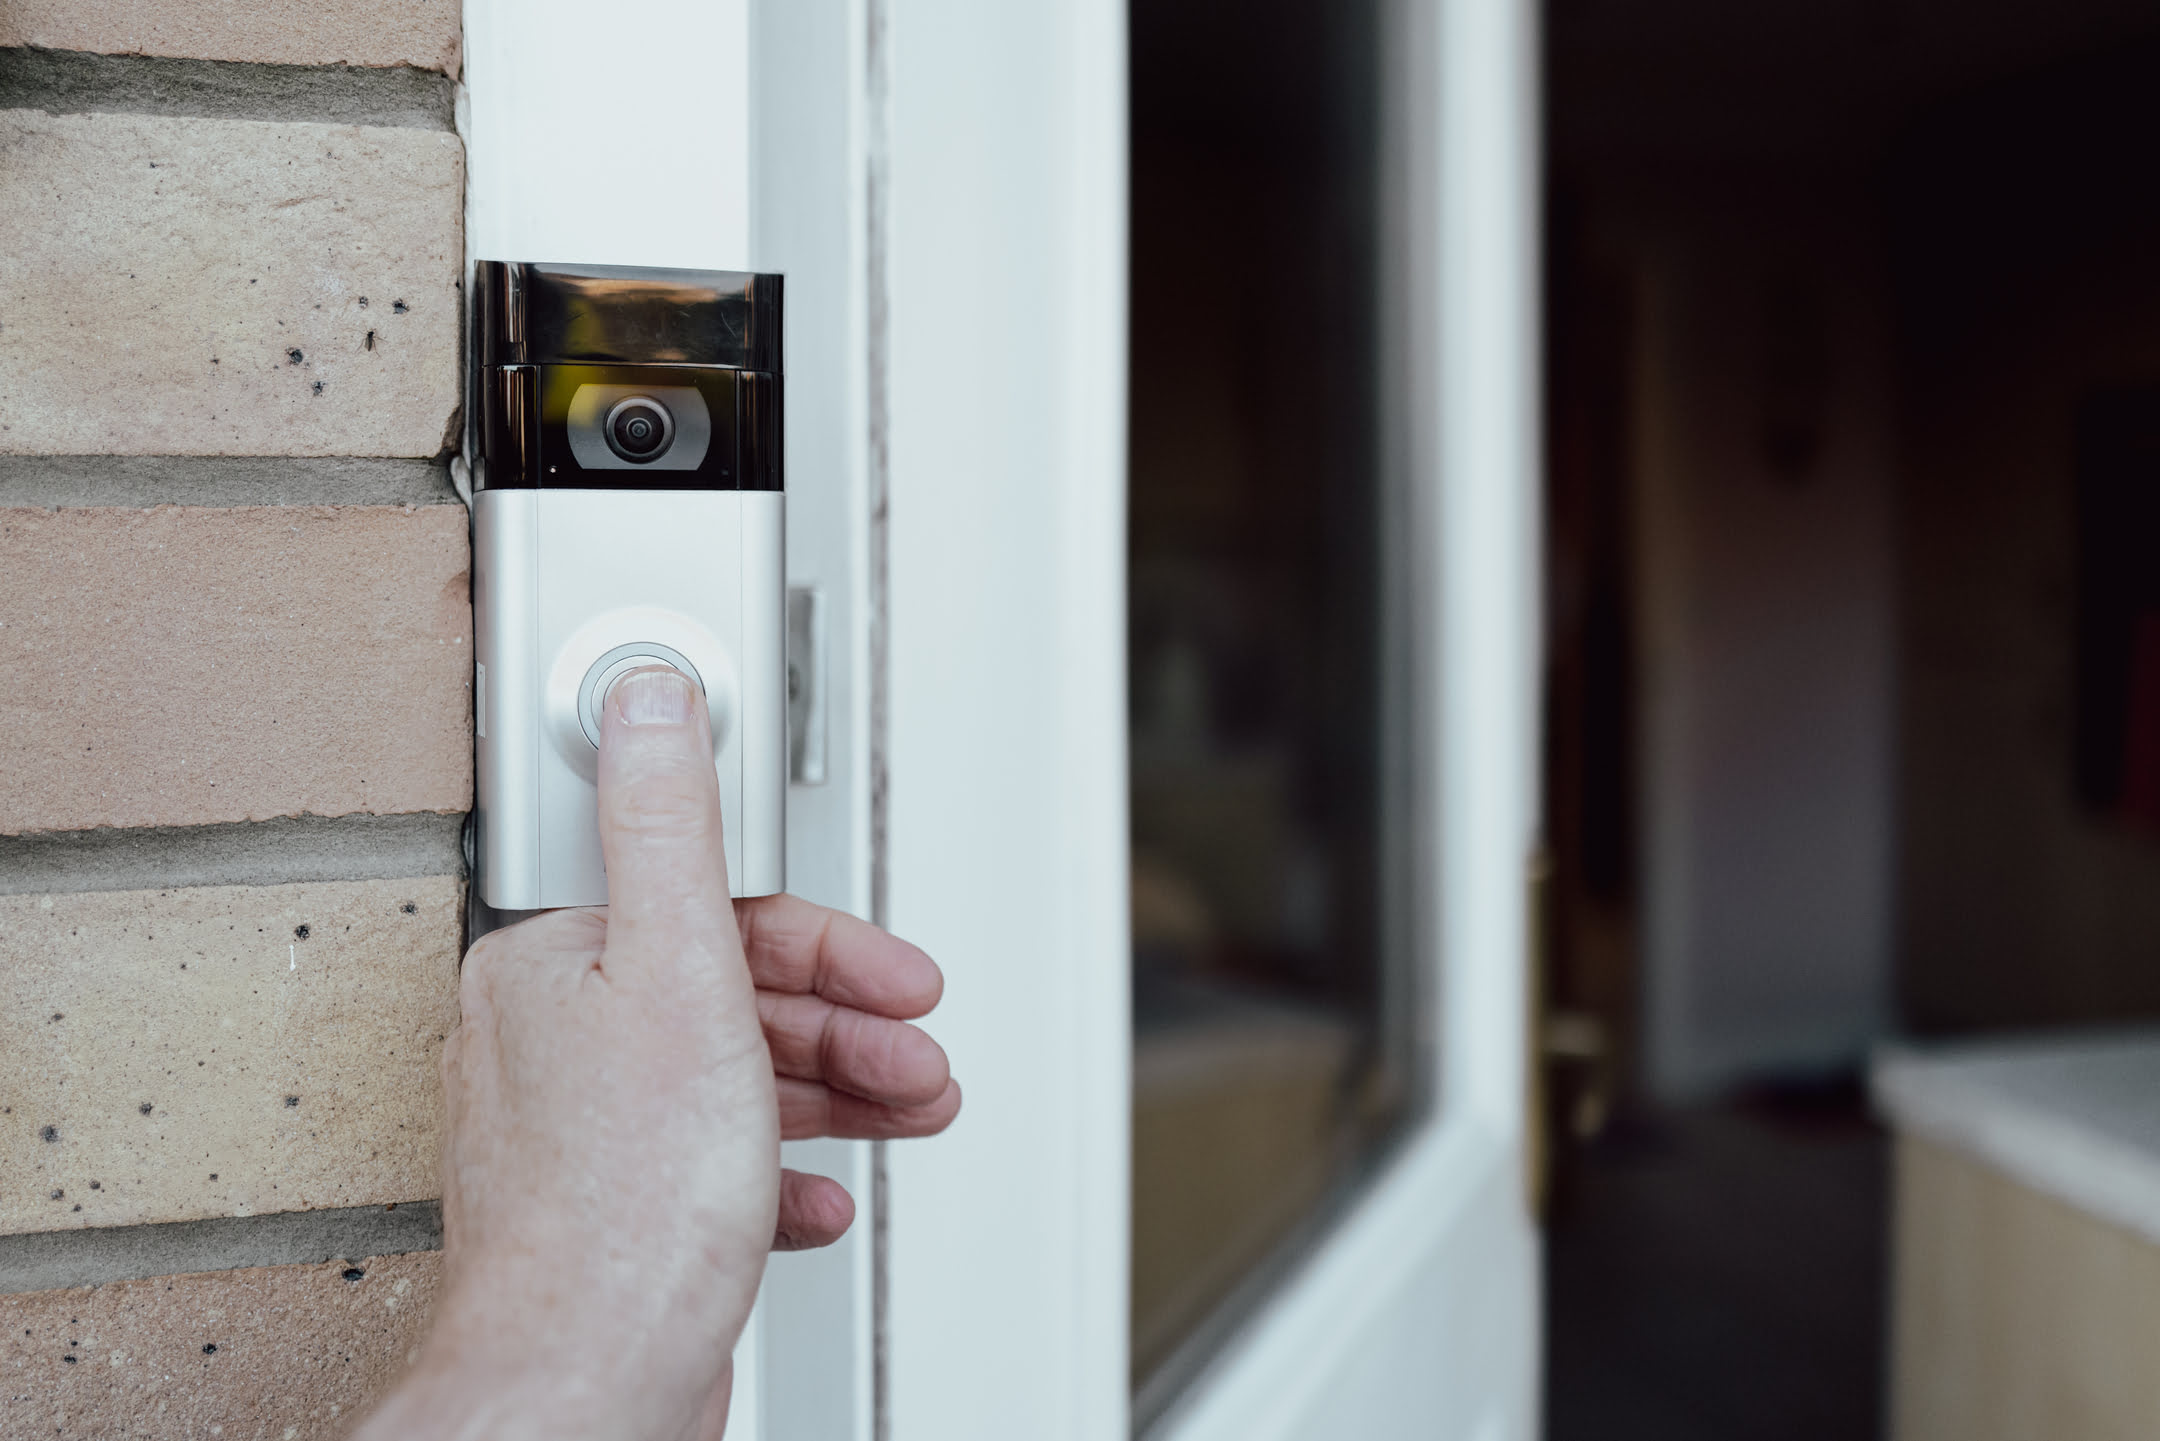 How To Prevent Motion Detector Activations On Ring Doorbell